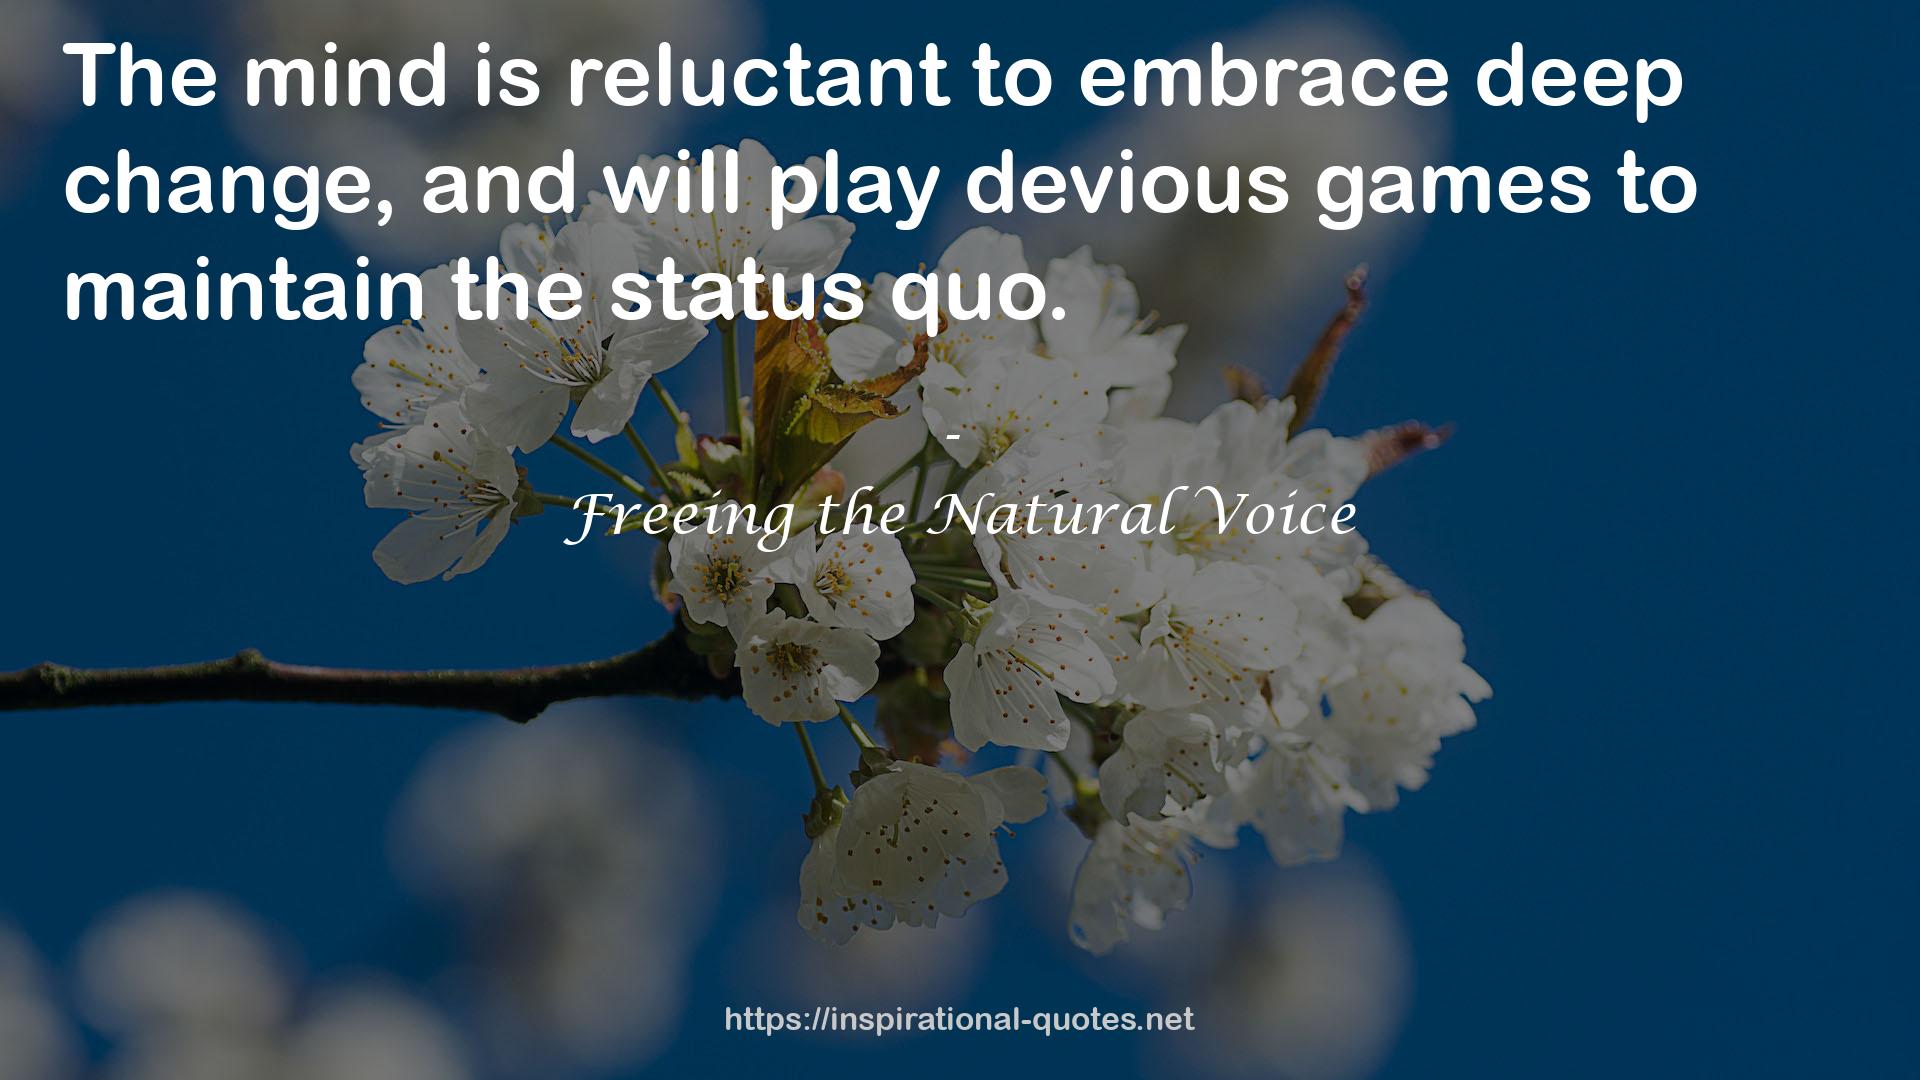 Freeing the Natural Voice QUOTES